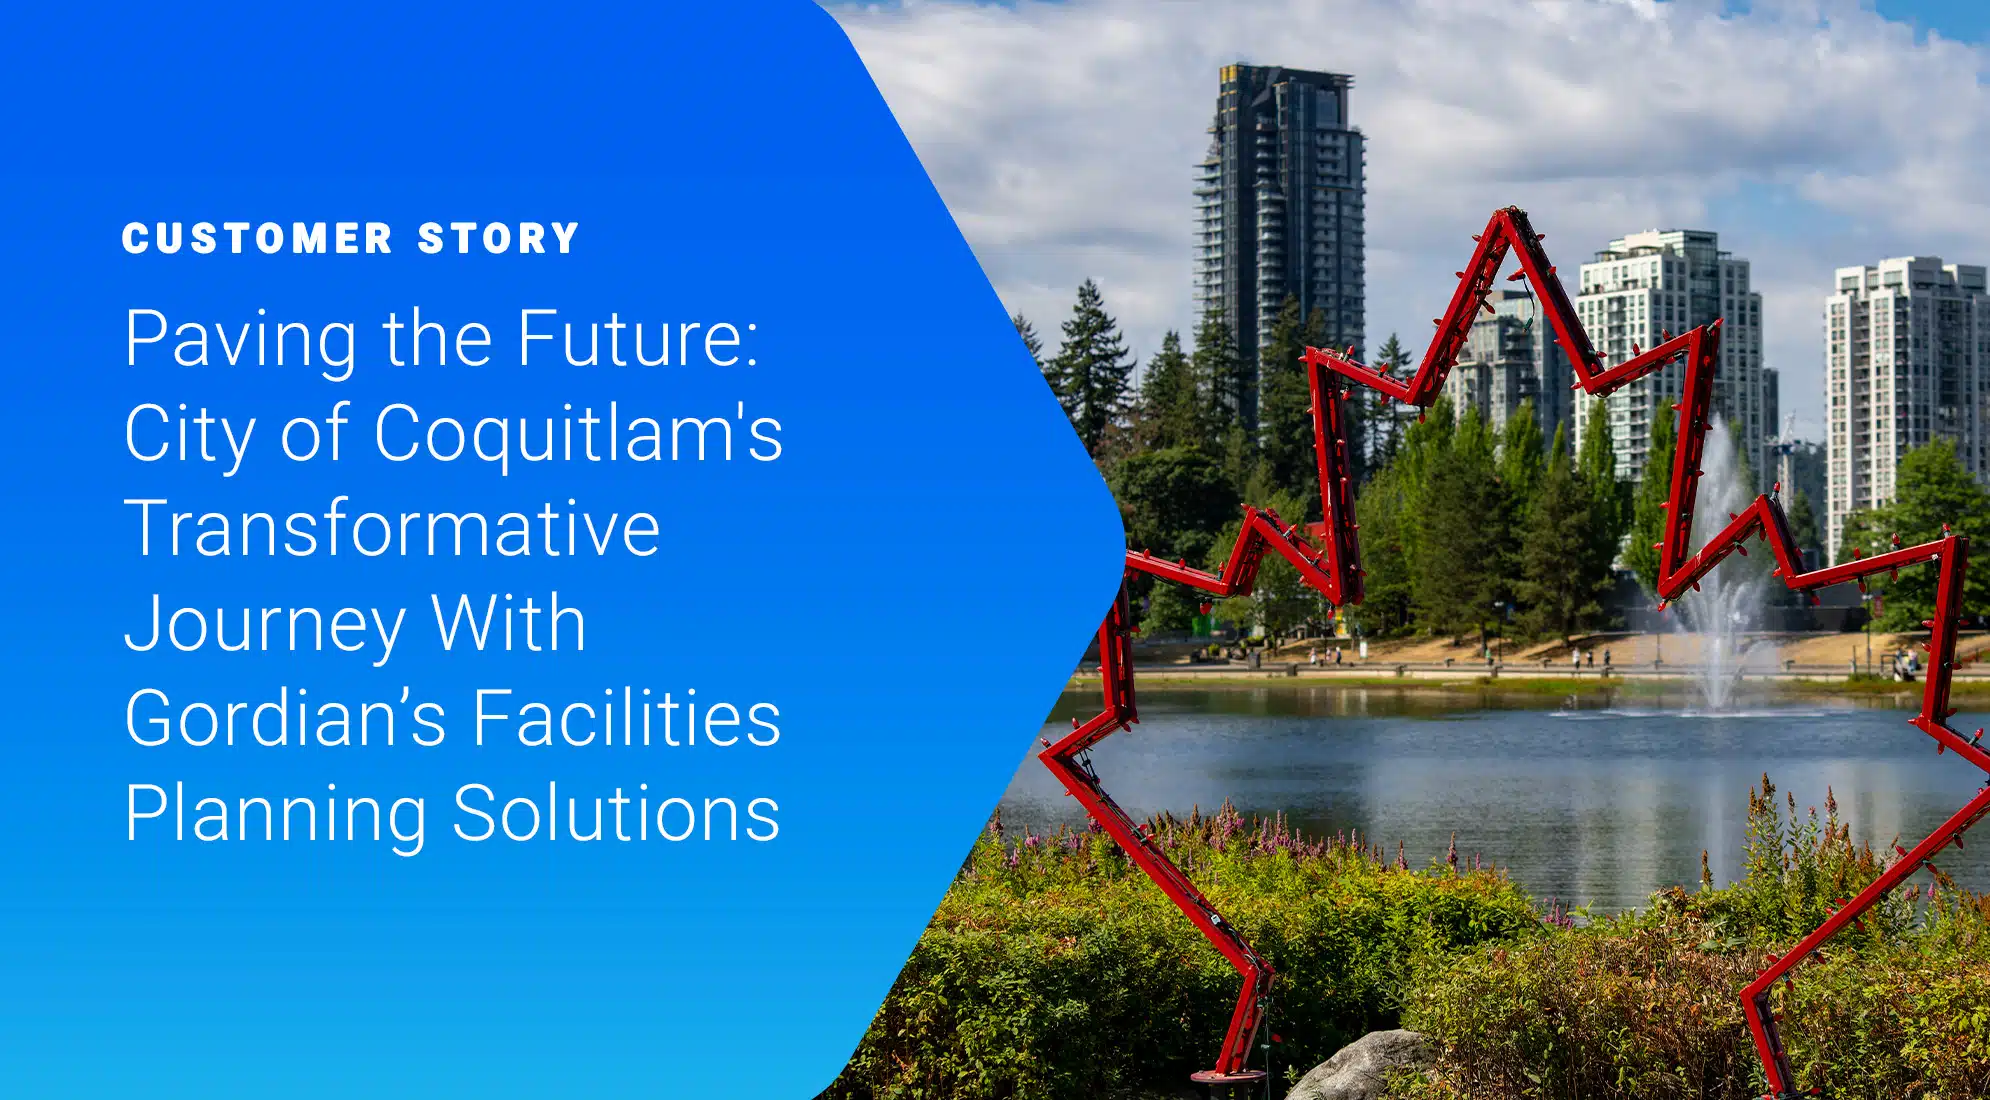 Paving the Future: City of Coquitlam’s Transformative Journey With Gordian’s Facilities Planning Solutions